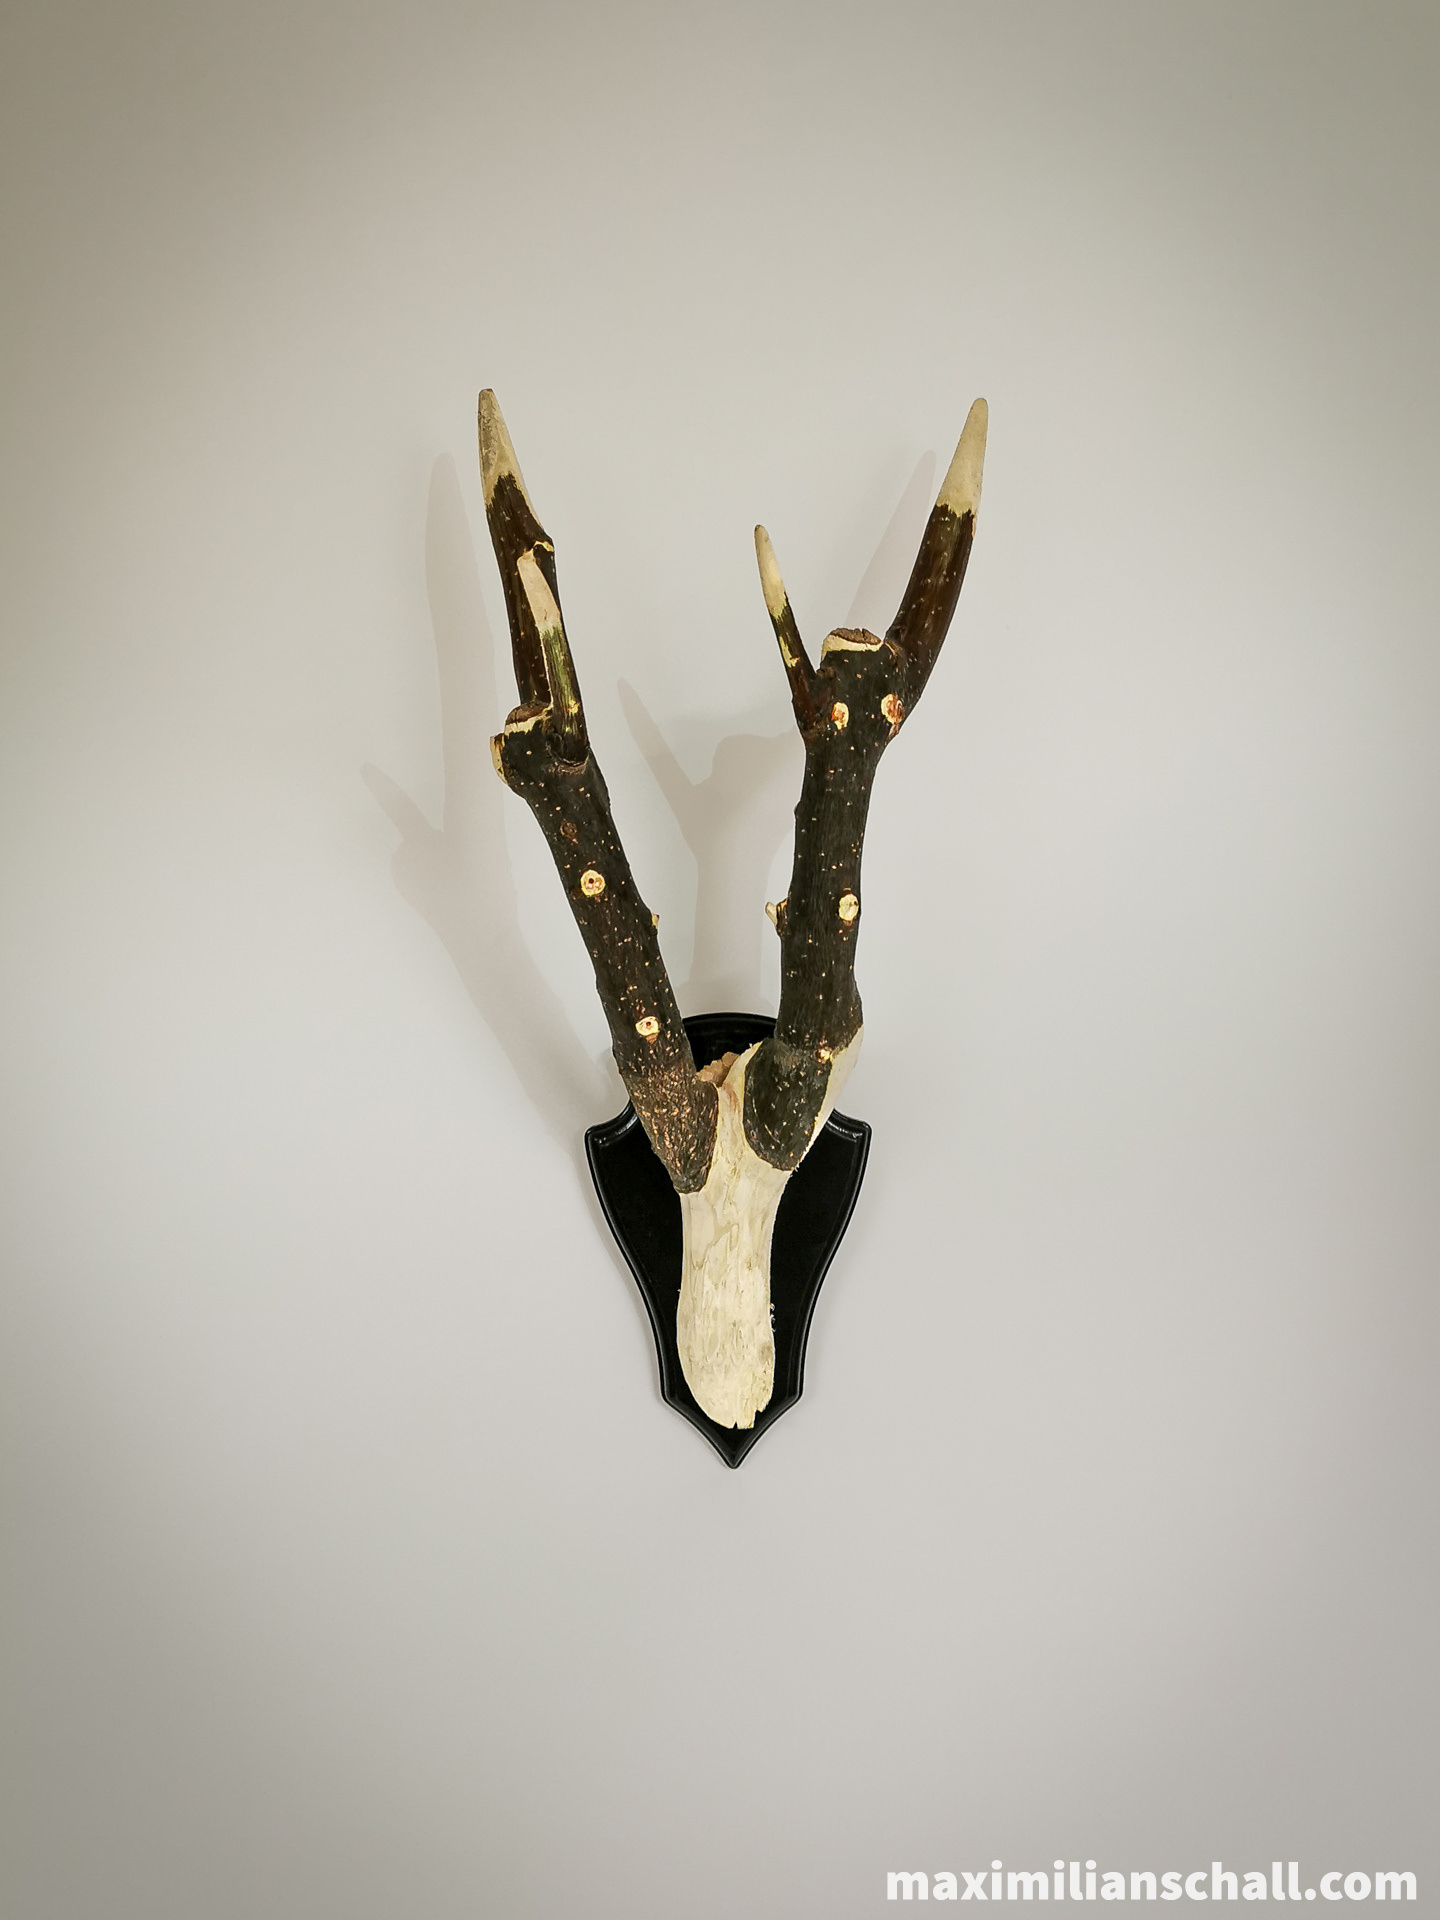 Picture of the artwork “Vegan Antlers” by Maximilian Schall